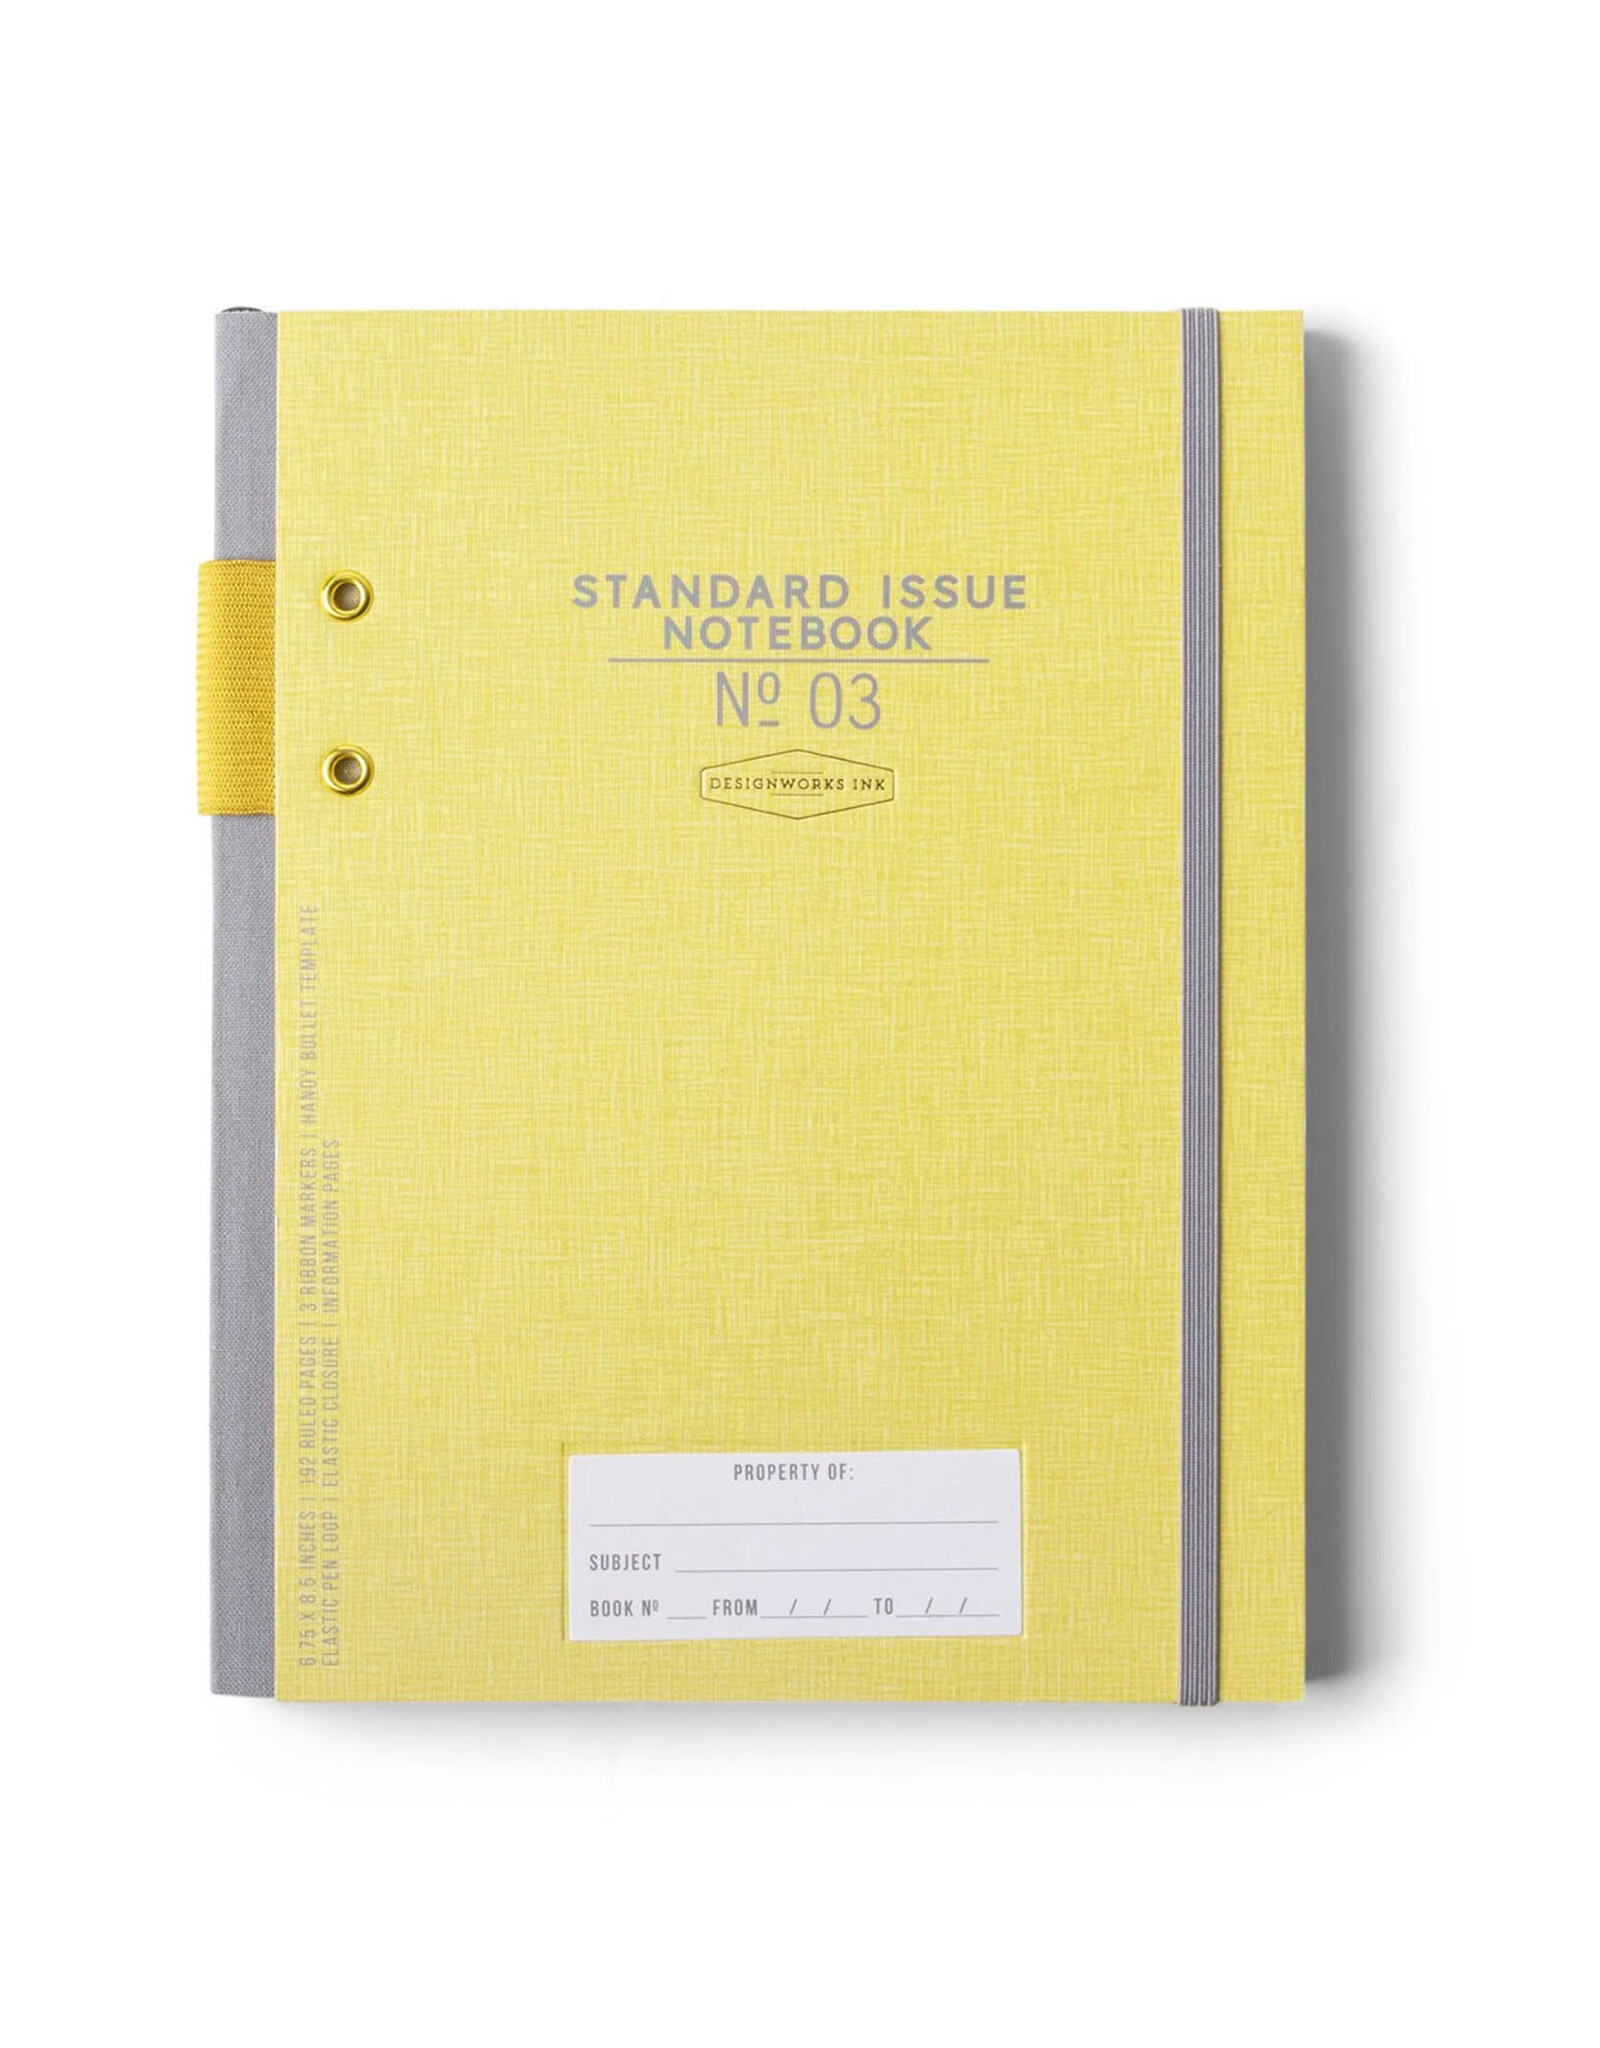 Standard Issue Notebook No. 03 - Yellow